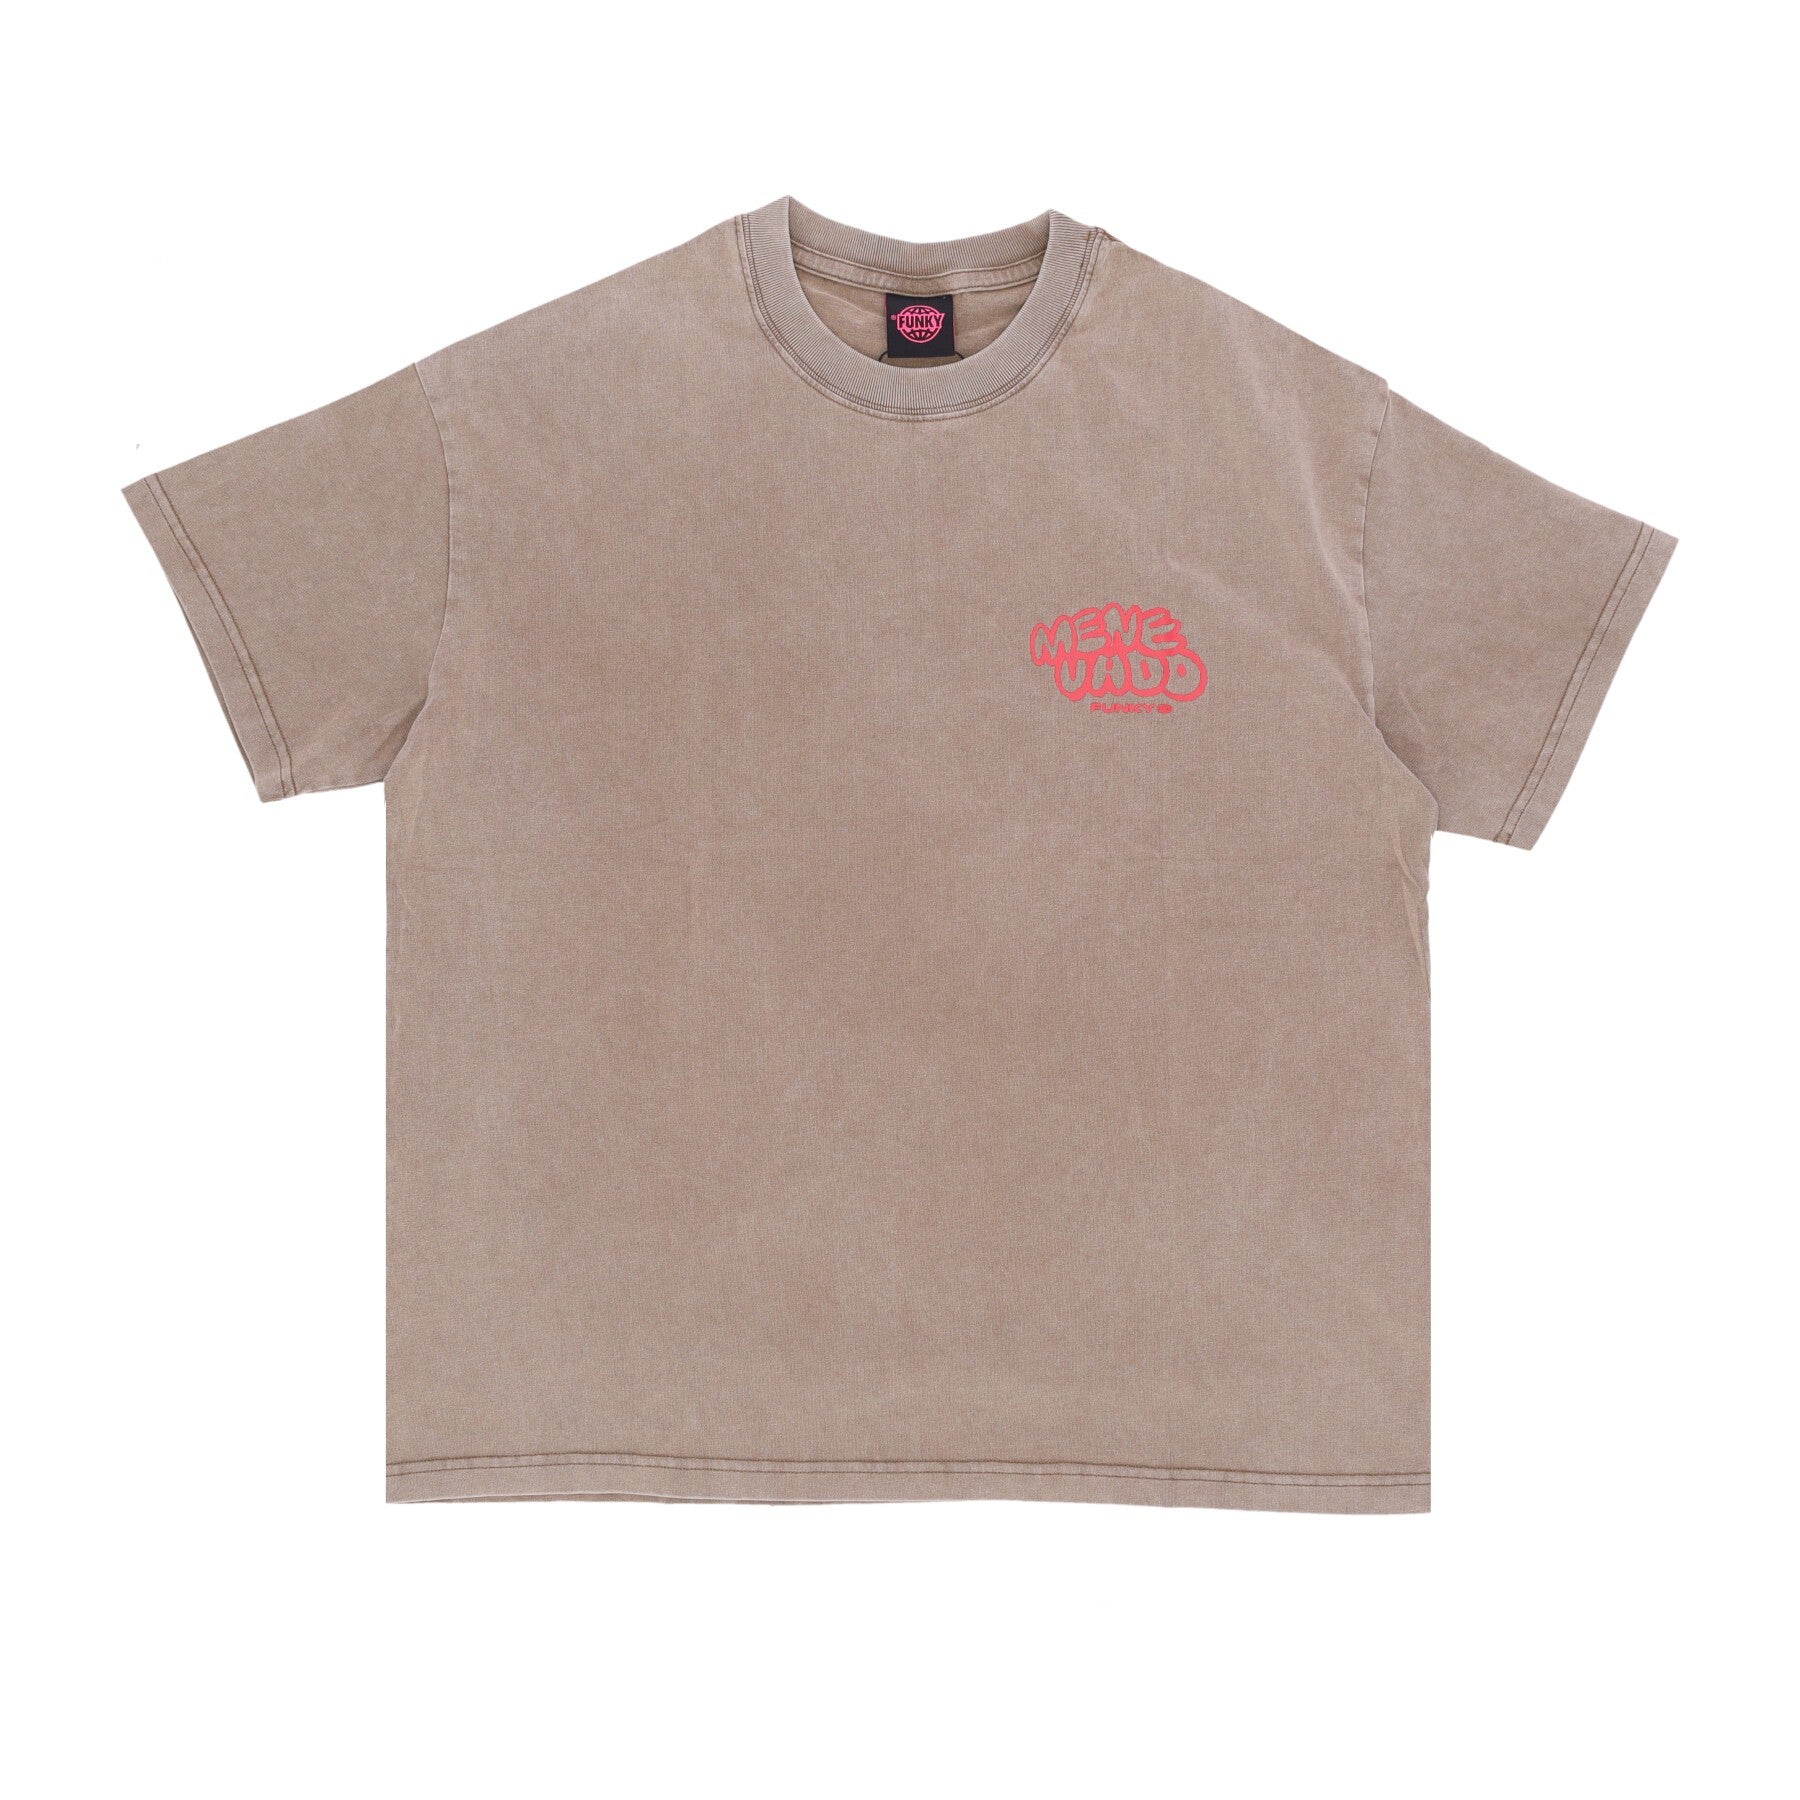 Menevado Tee Sand Washed Out Men's T-Shirt